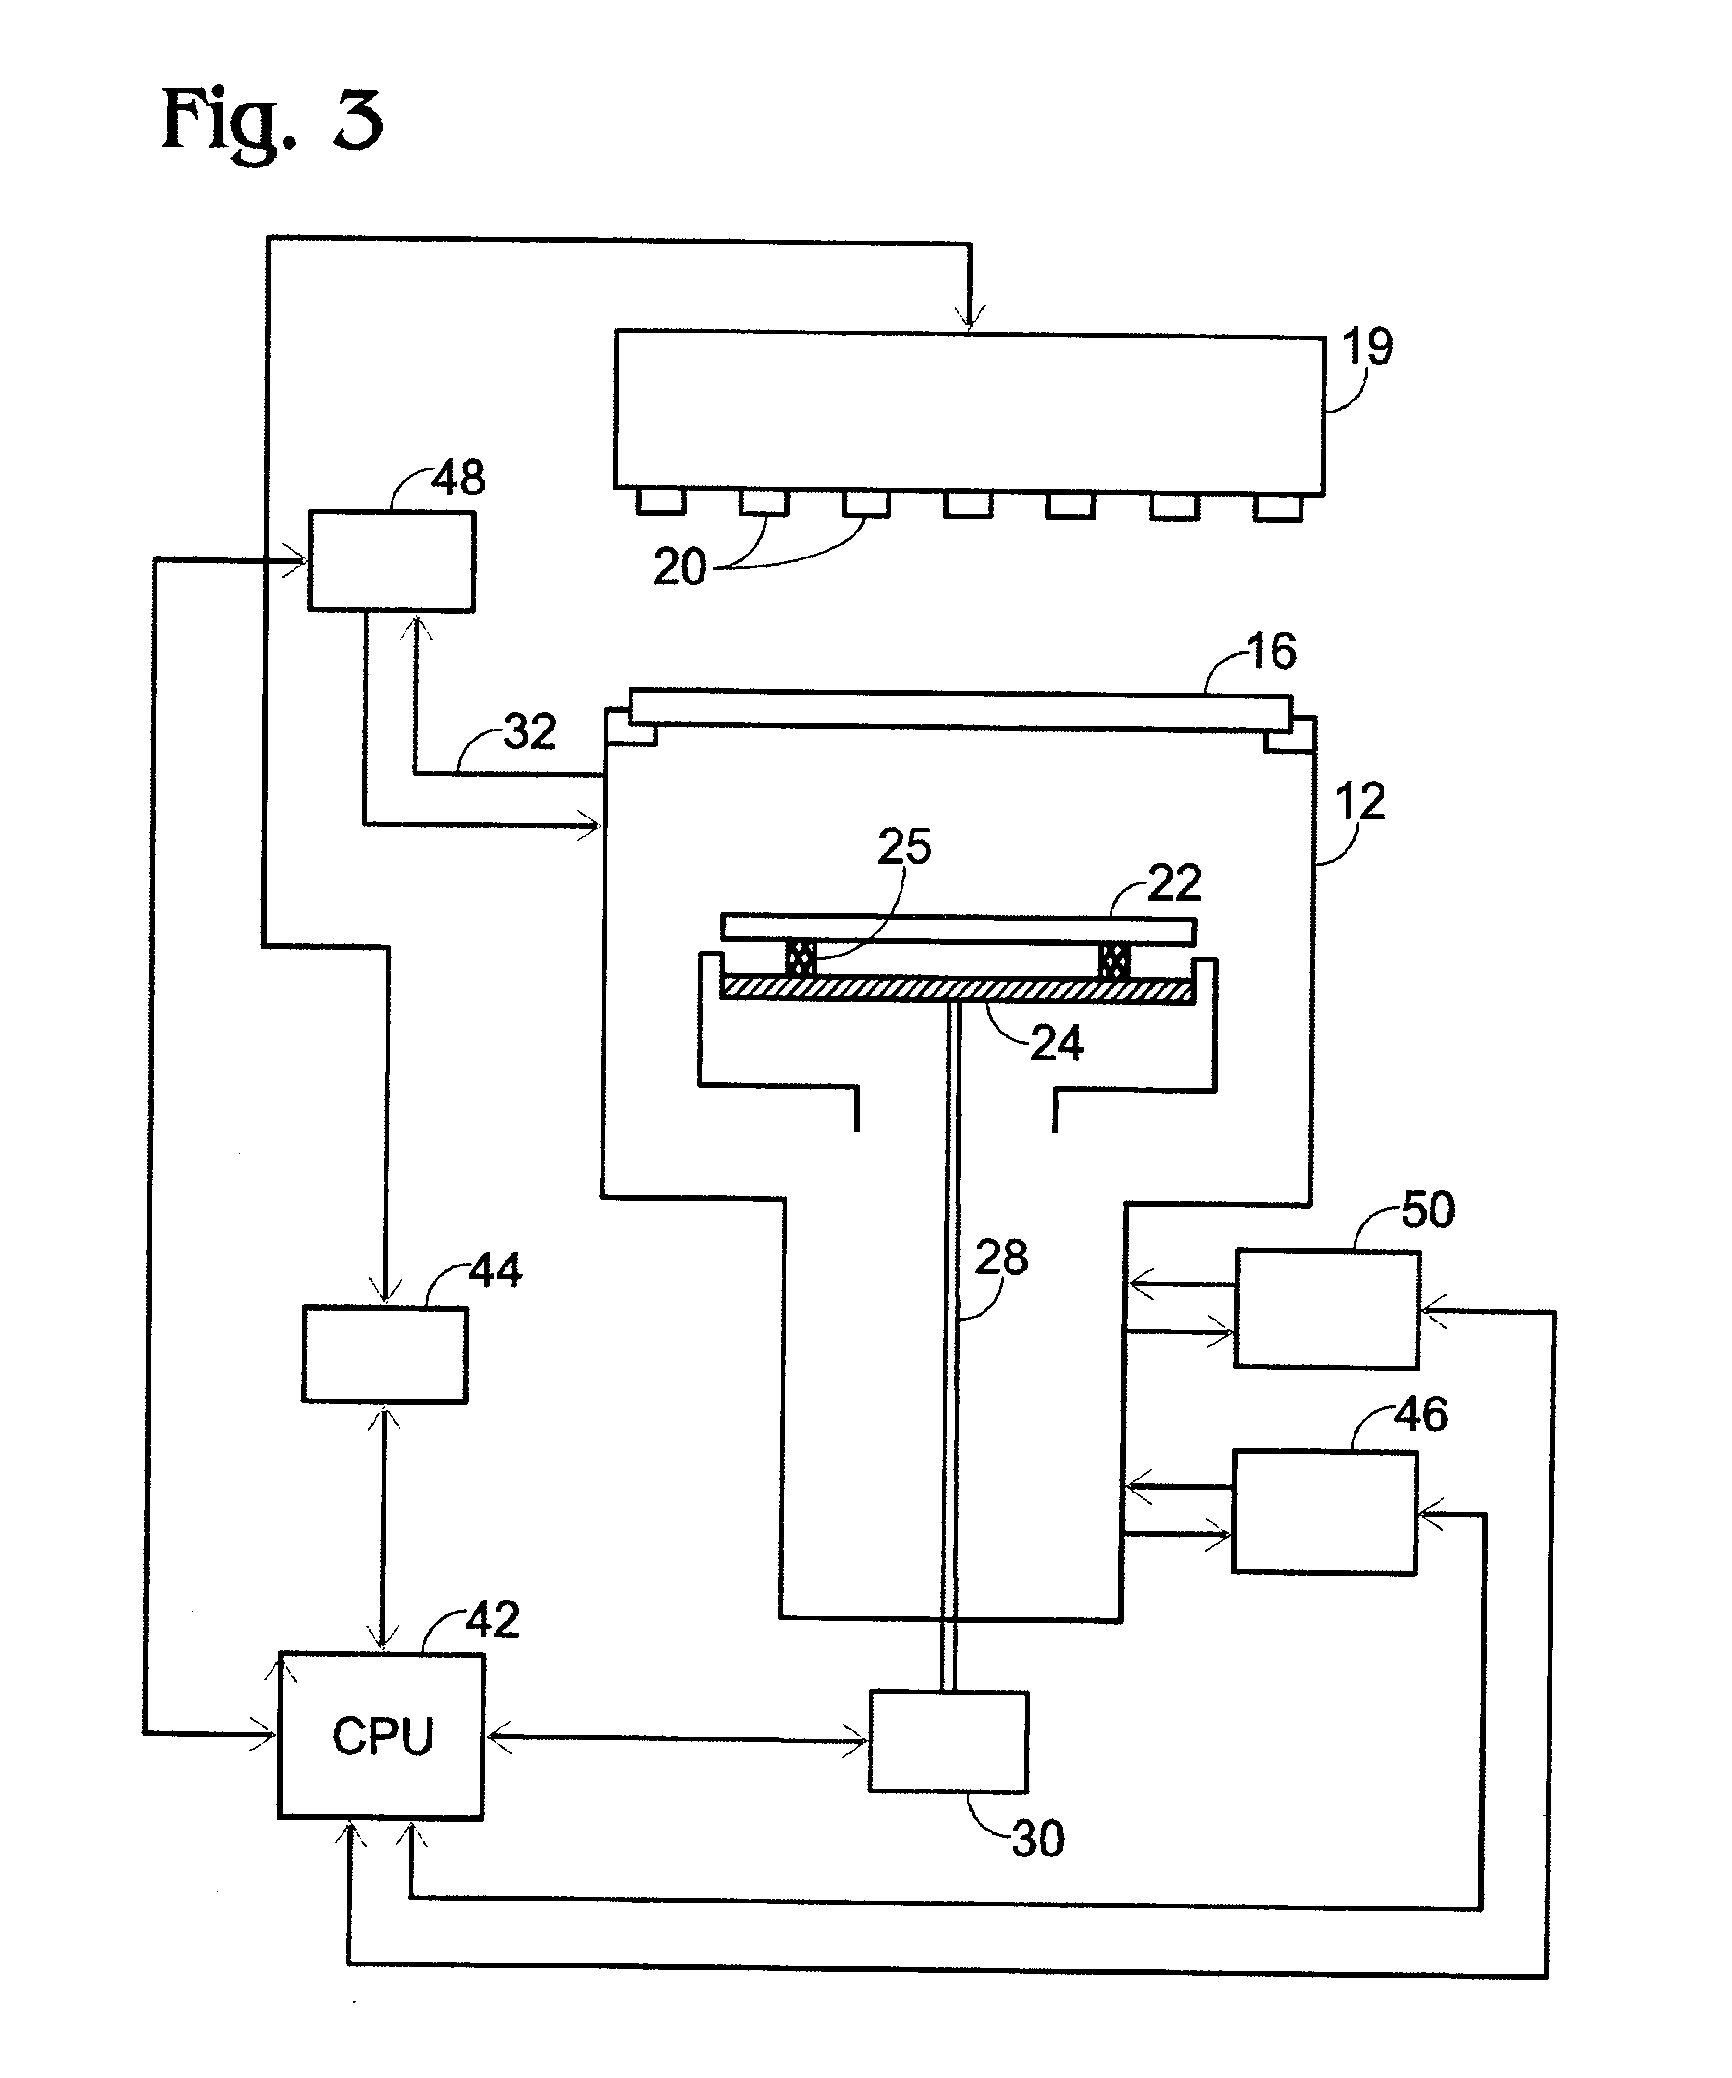 Method of processing selected surfaces in a semiconductor process chamber based on a temperature differential between surfaces